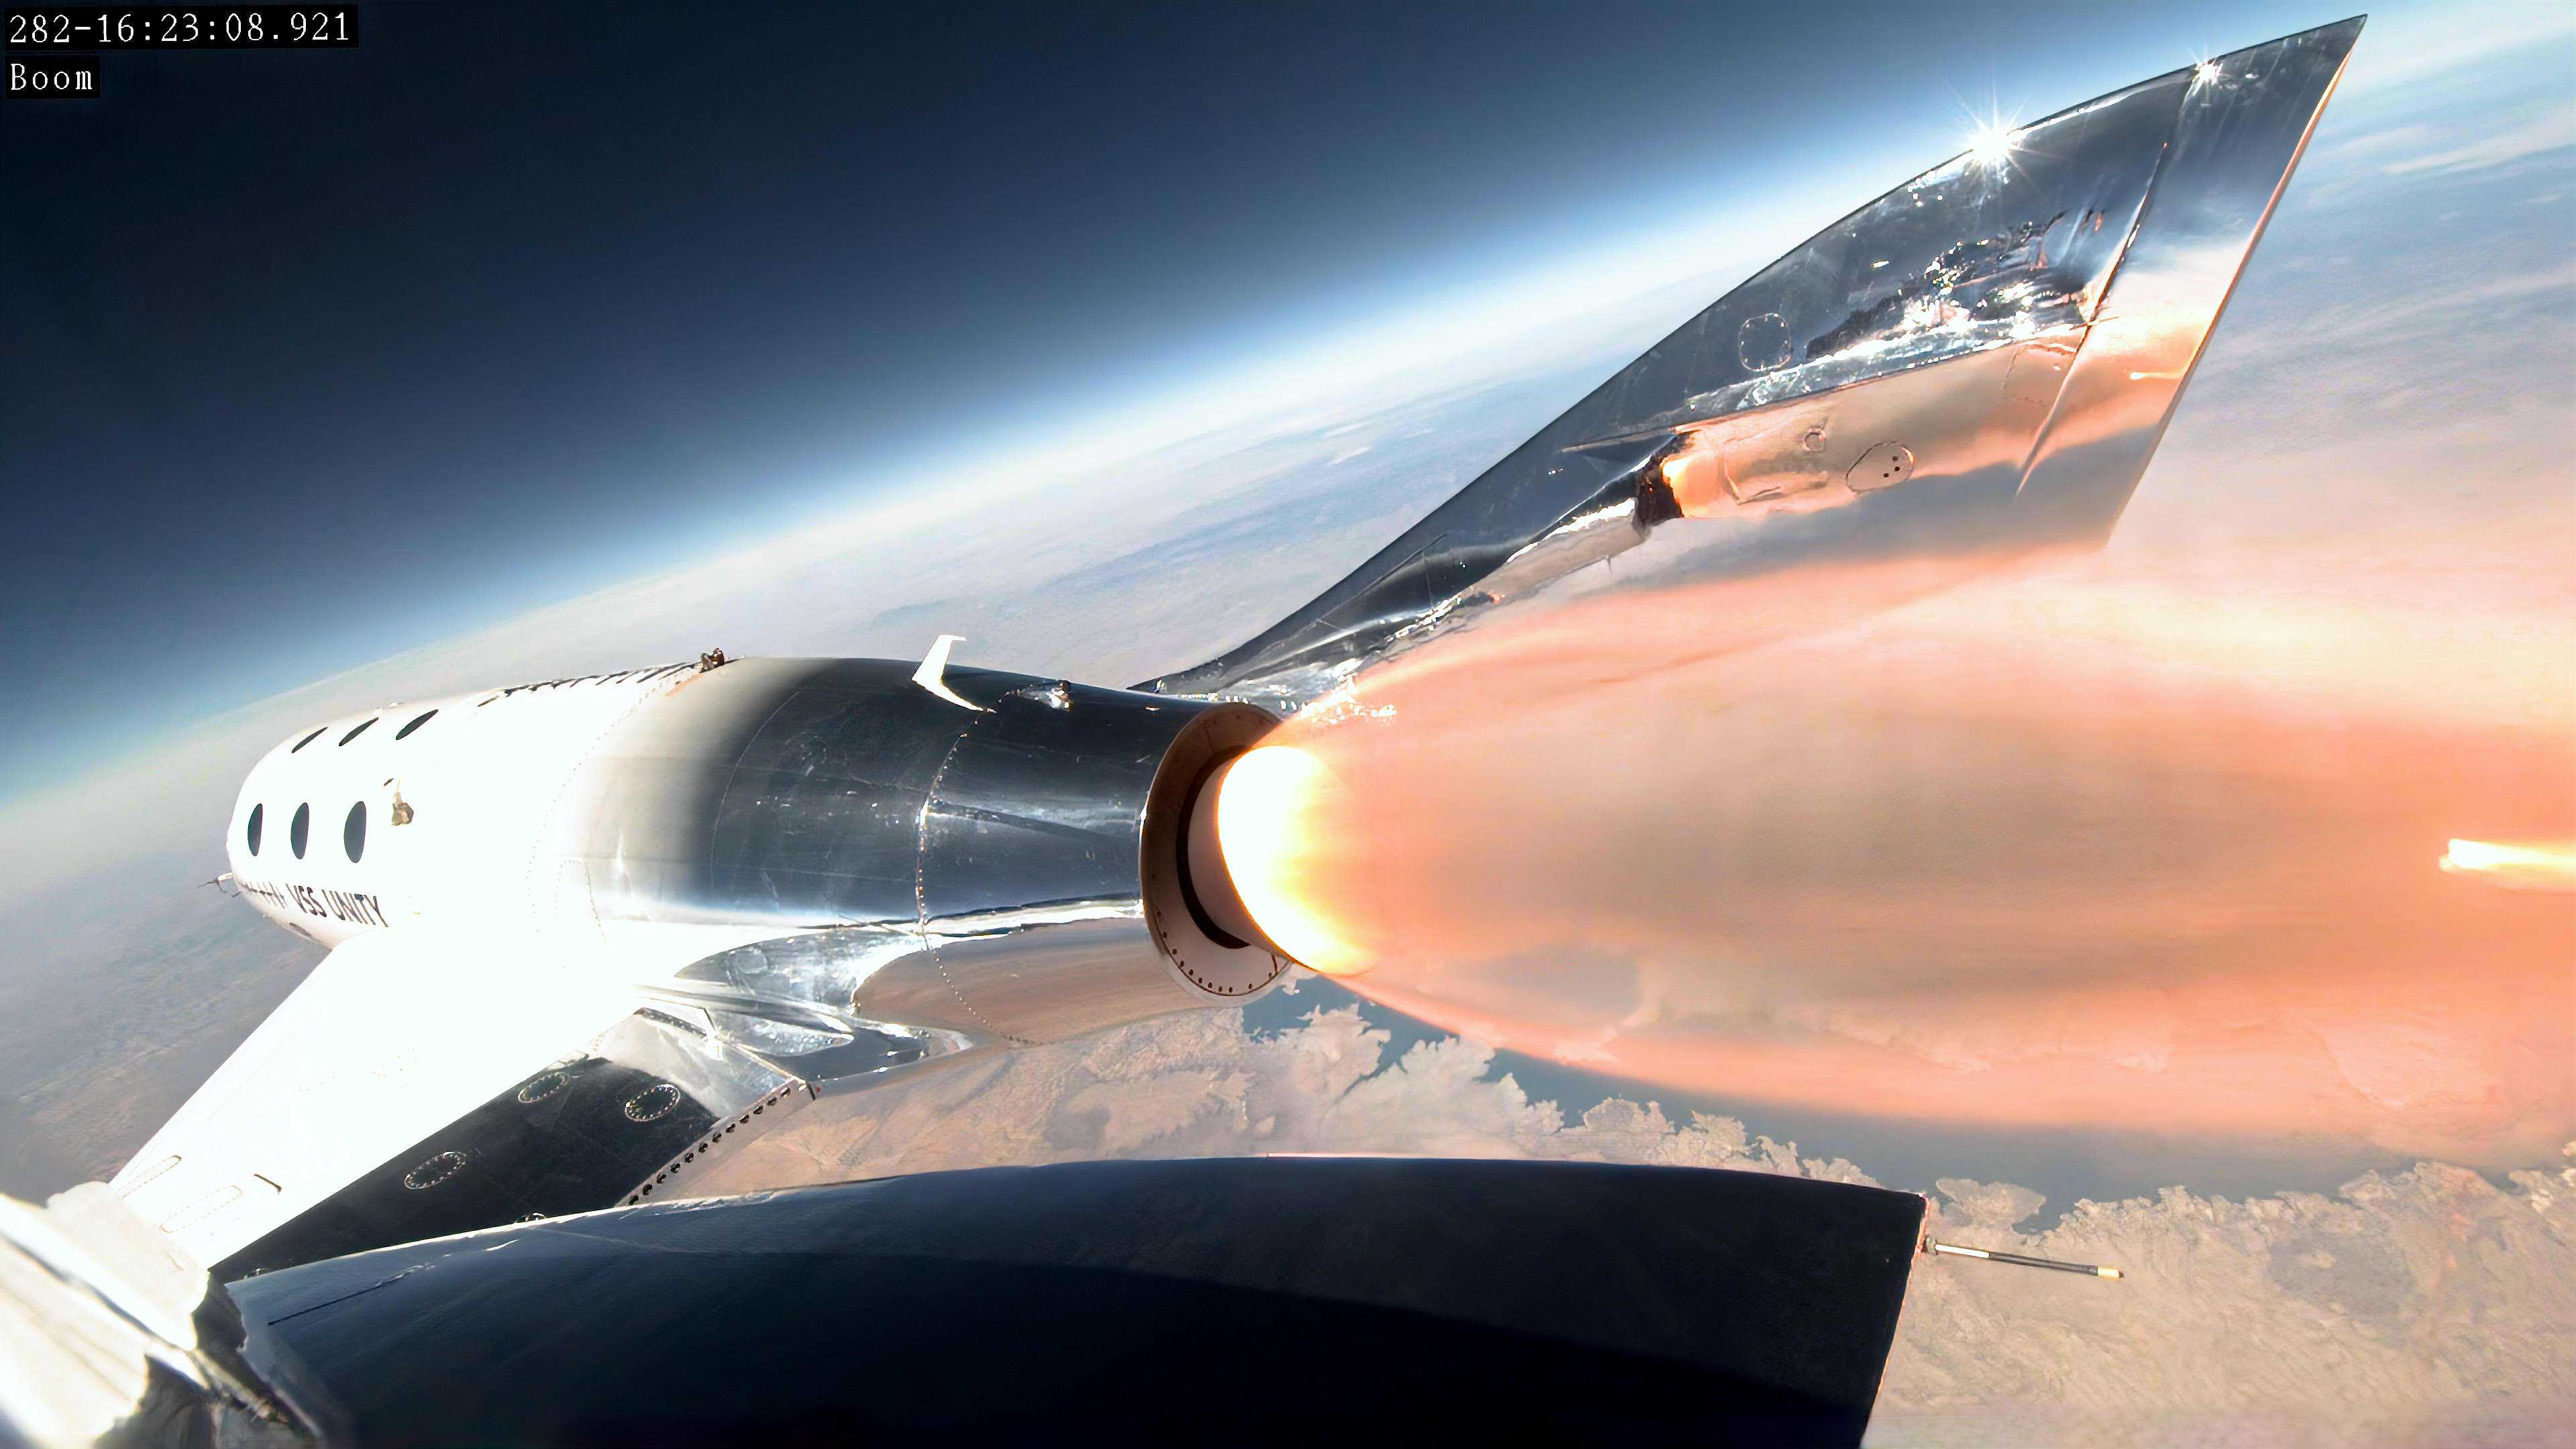 Virgin Galactic sets first commercial space tourism flight for this month; shares spike more than 40%